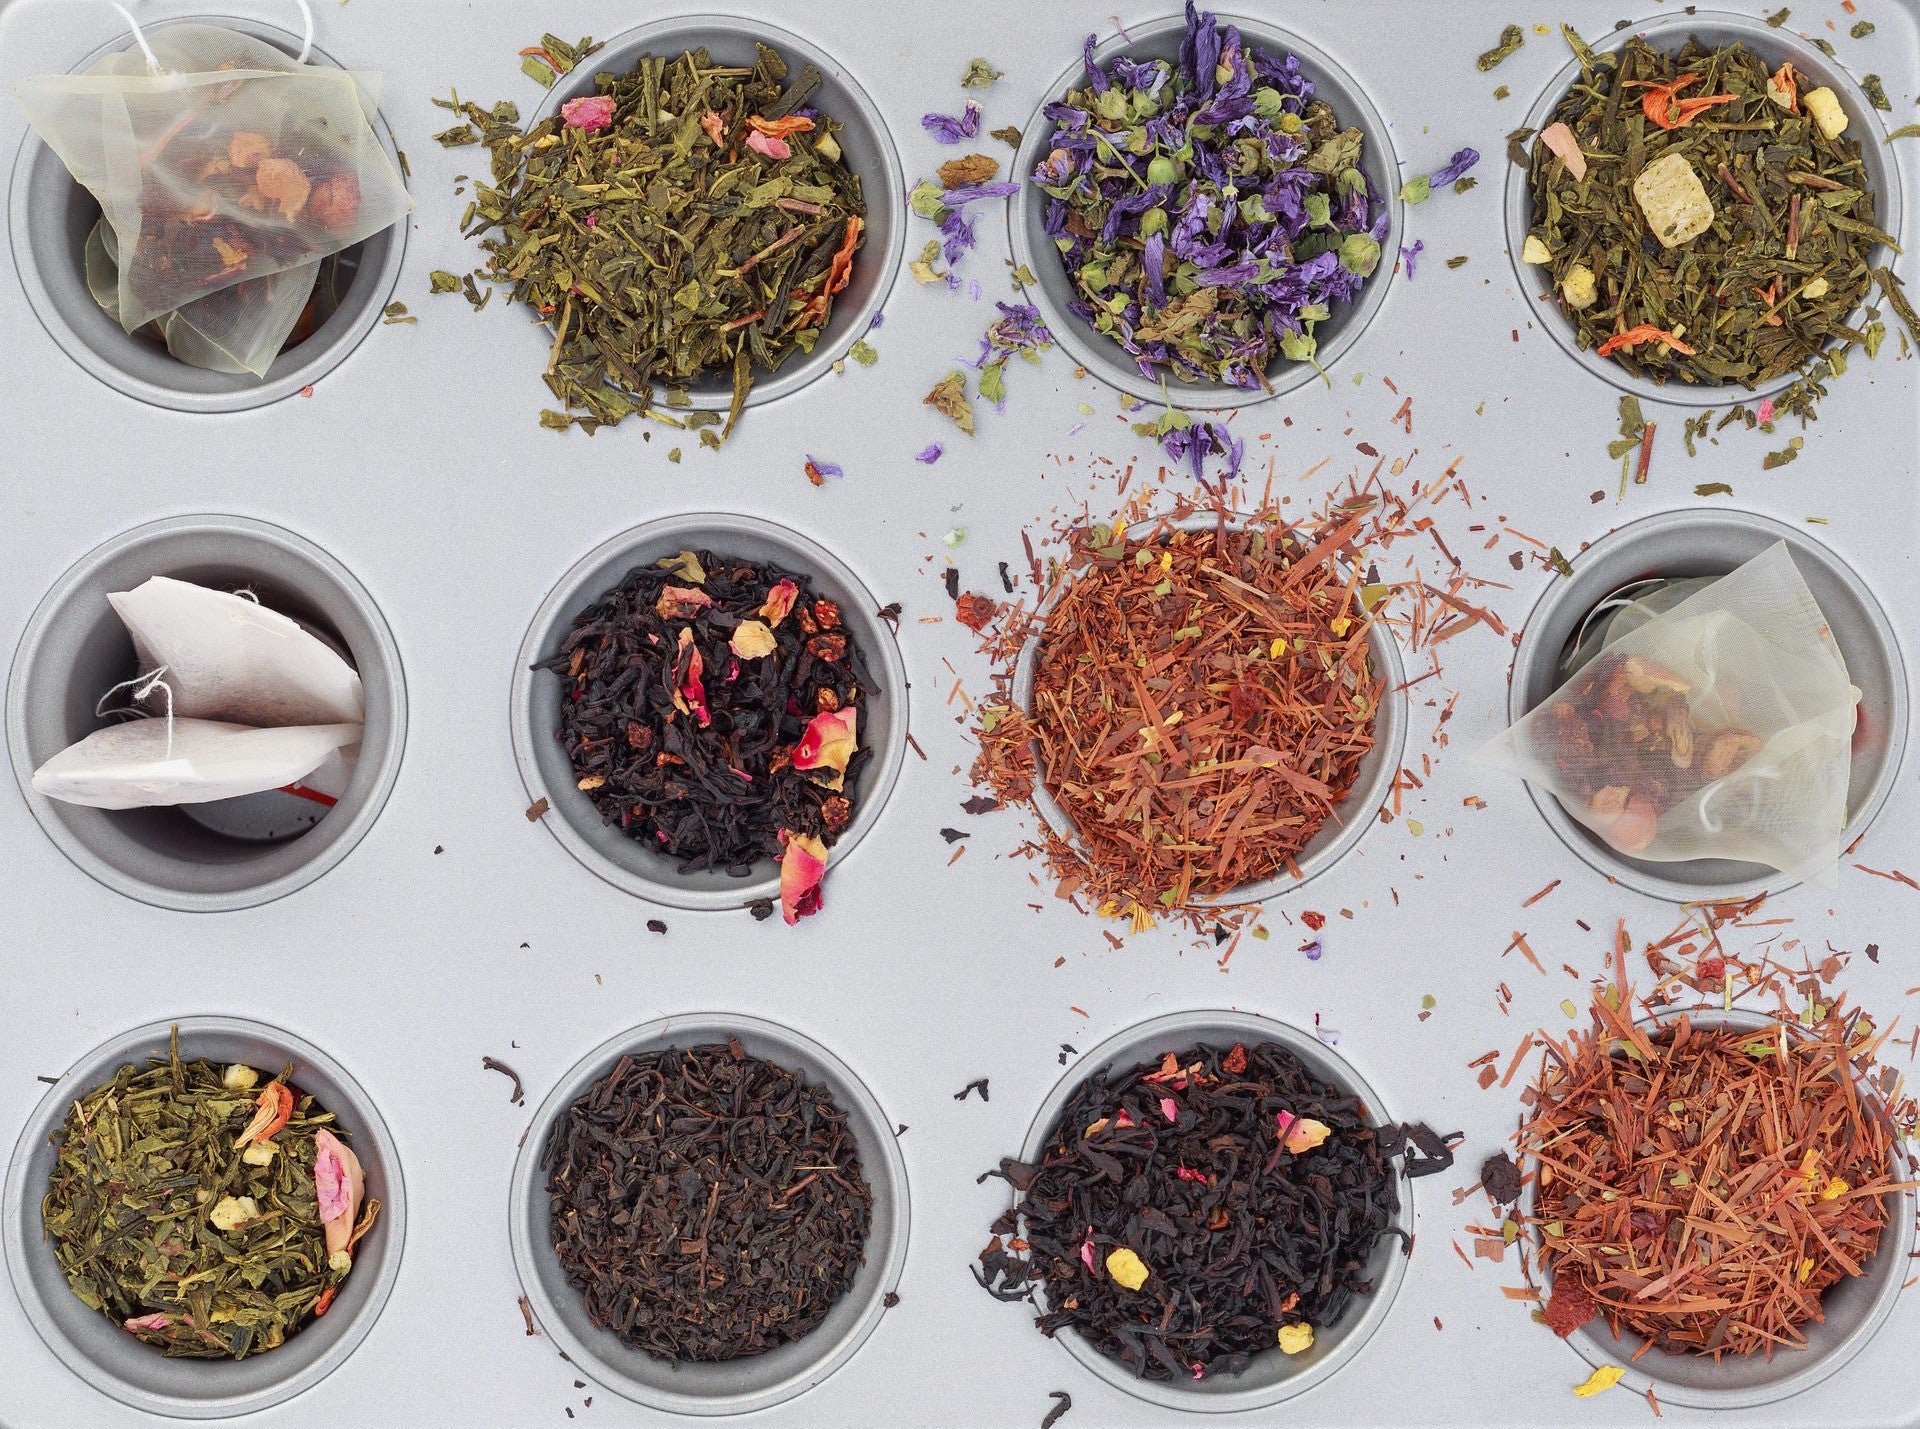 A variety of loose leaf and bagged teas in cups of a baking tray